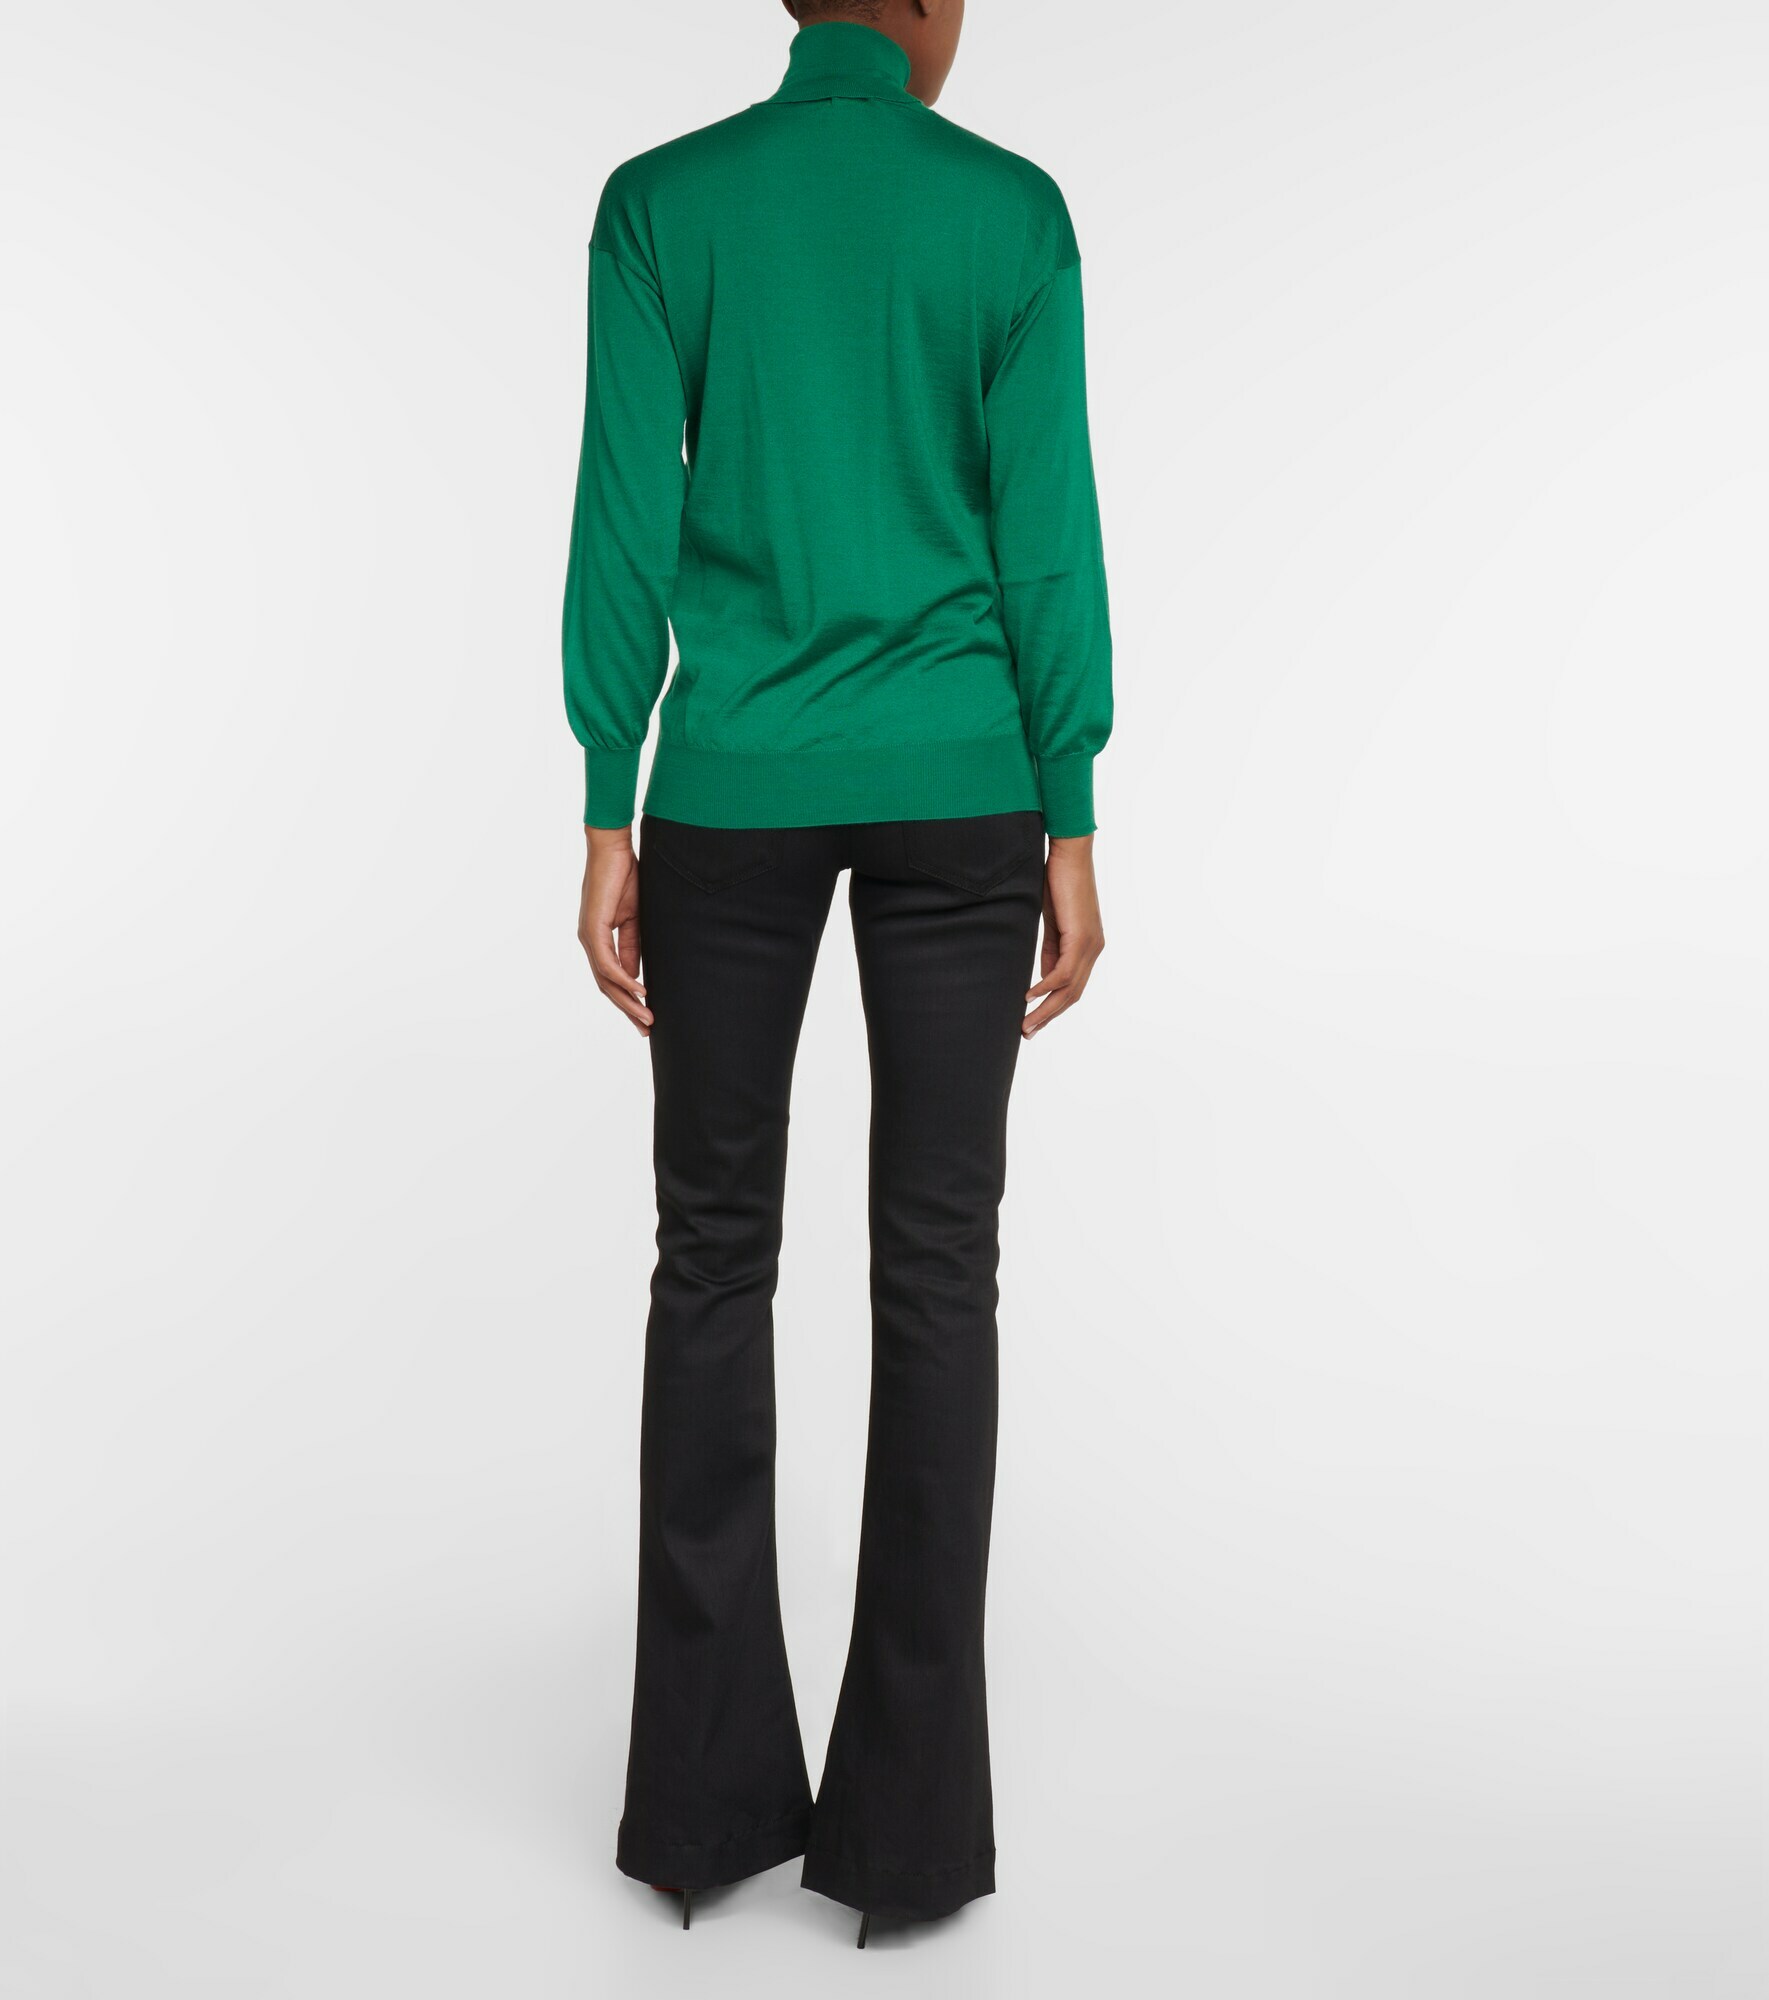 Tom Ford - Cashmere and silk turtleneck sweater TOM FORD